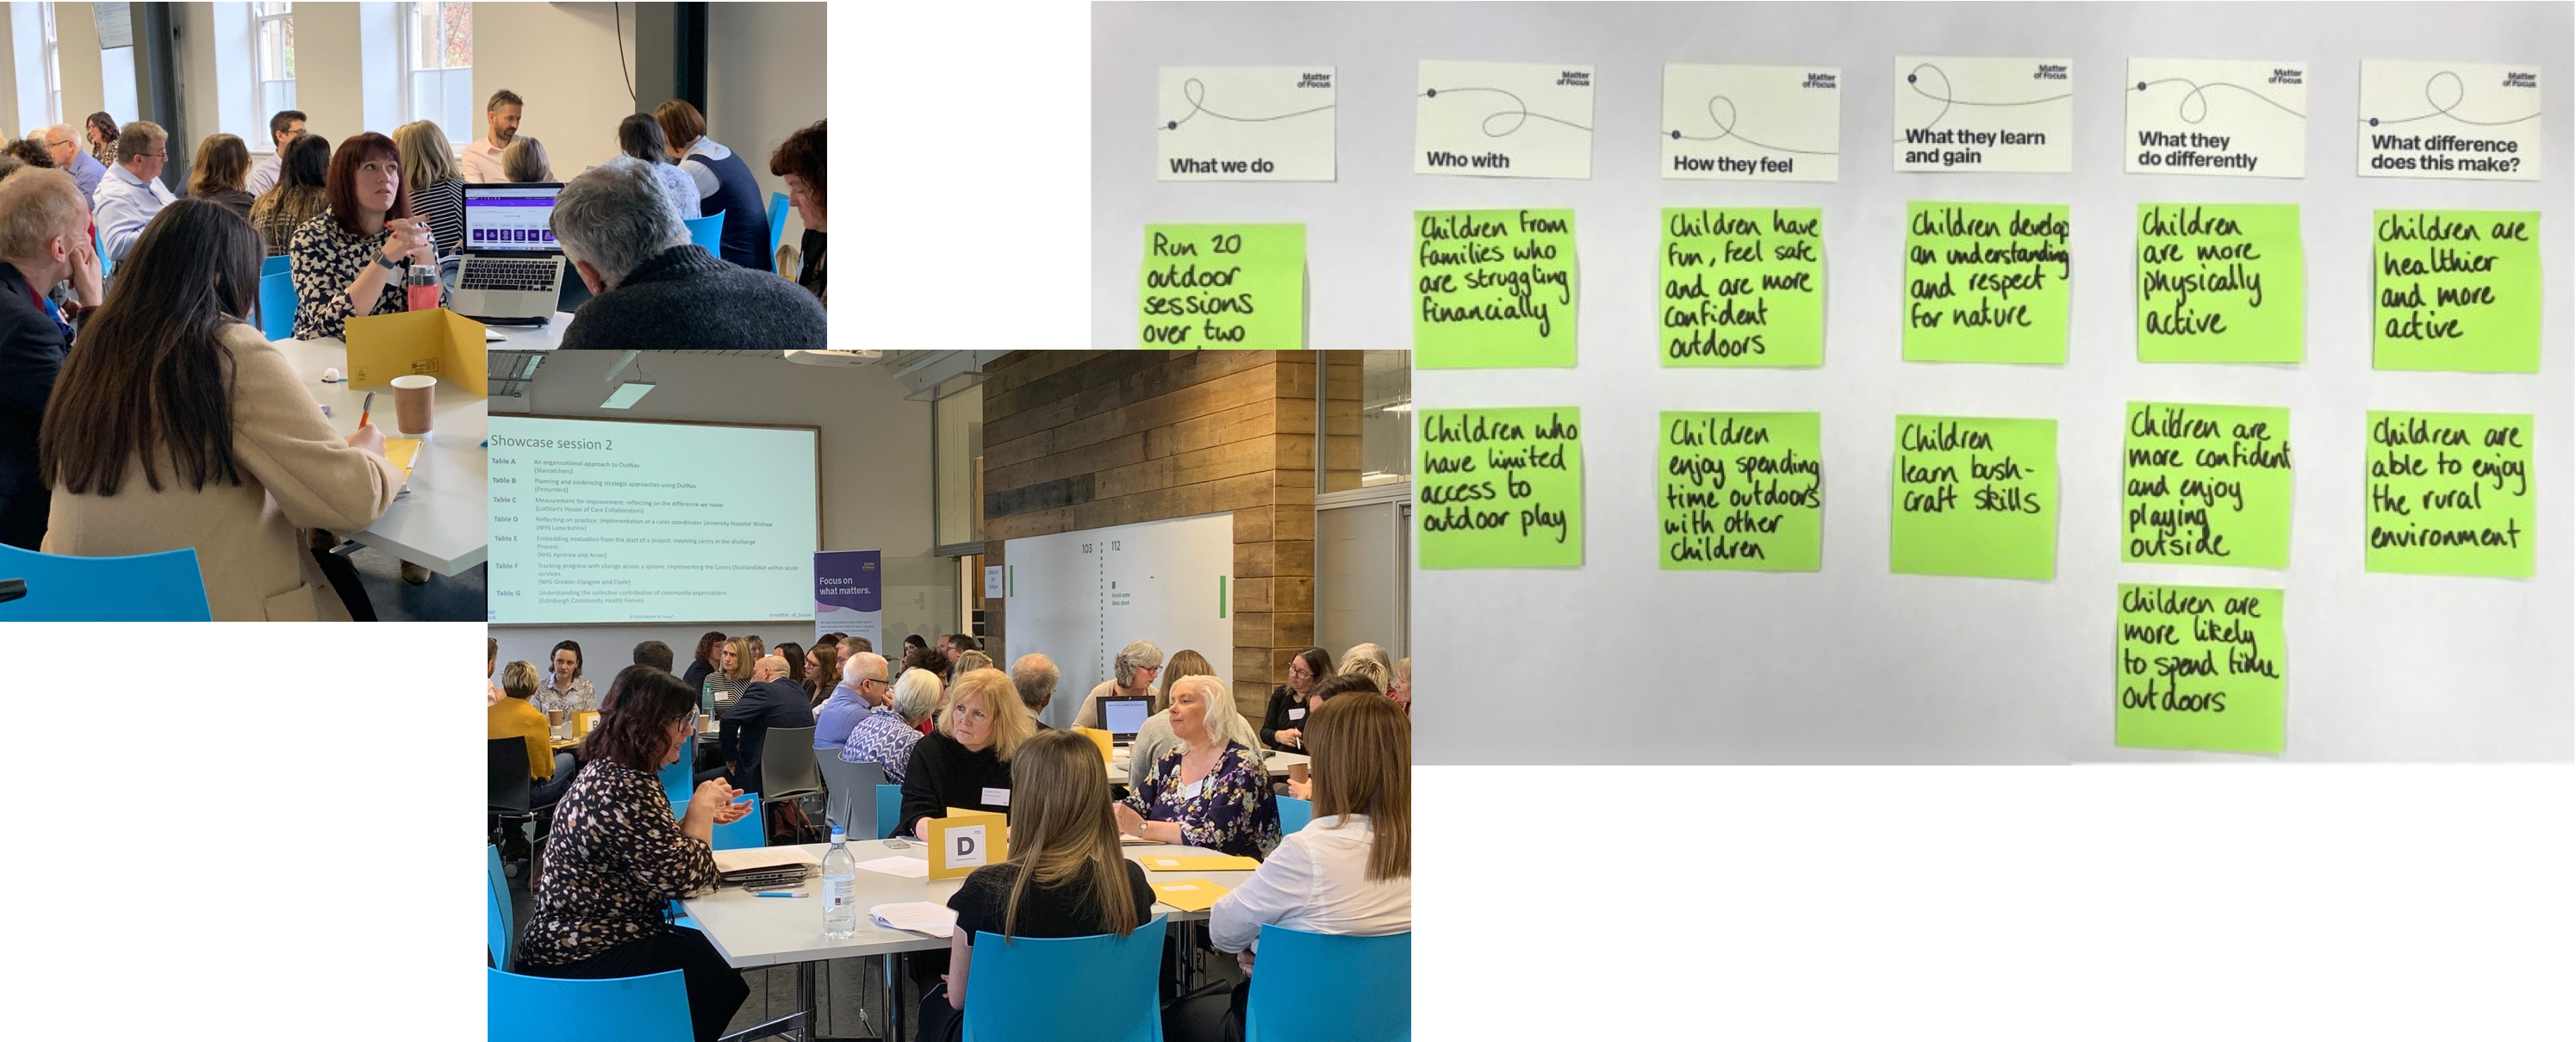 A montage of three images. Two focus groups and an image of sticky notes in columns.